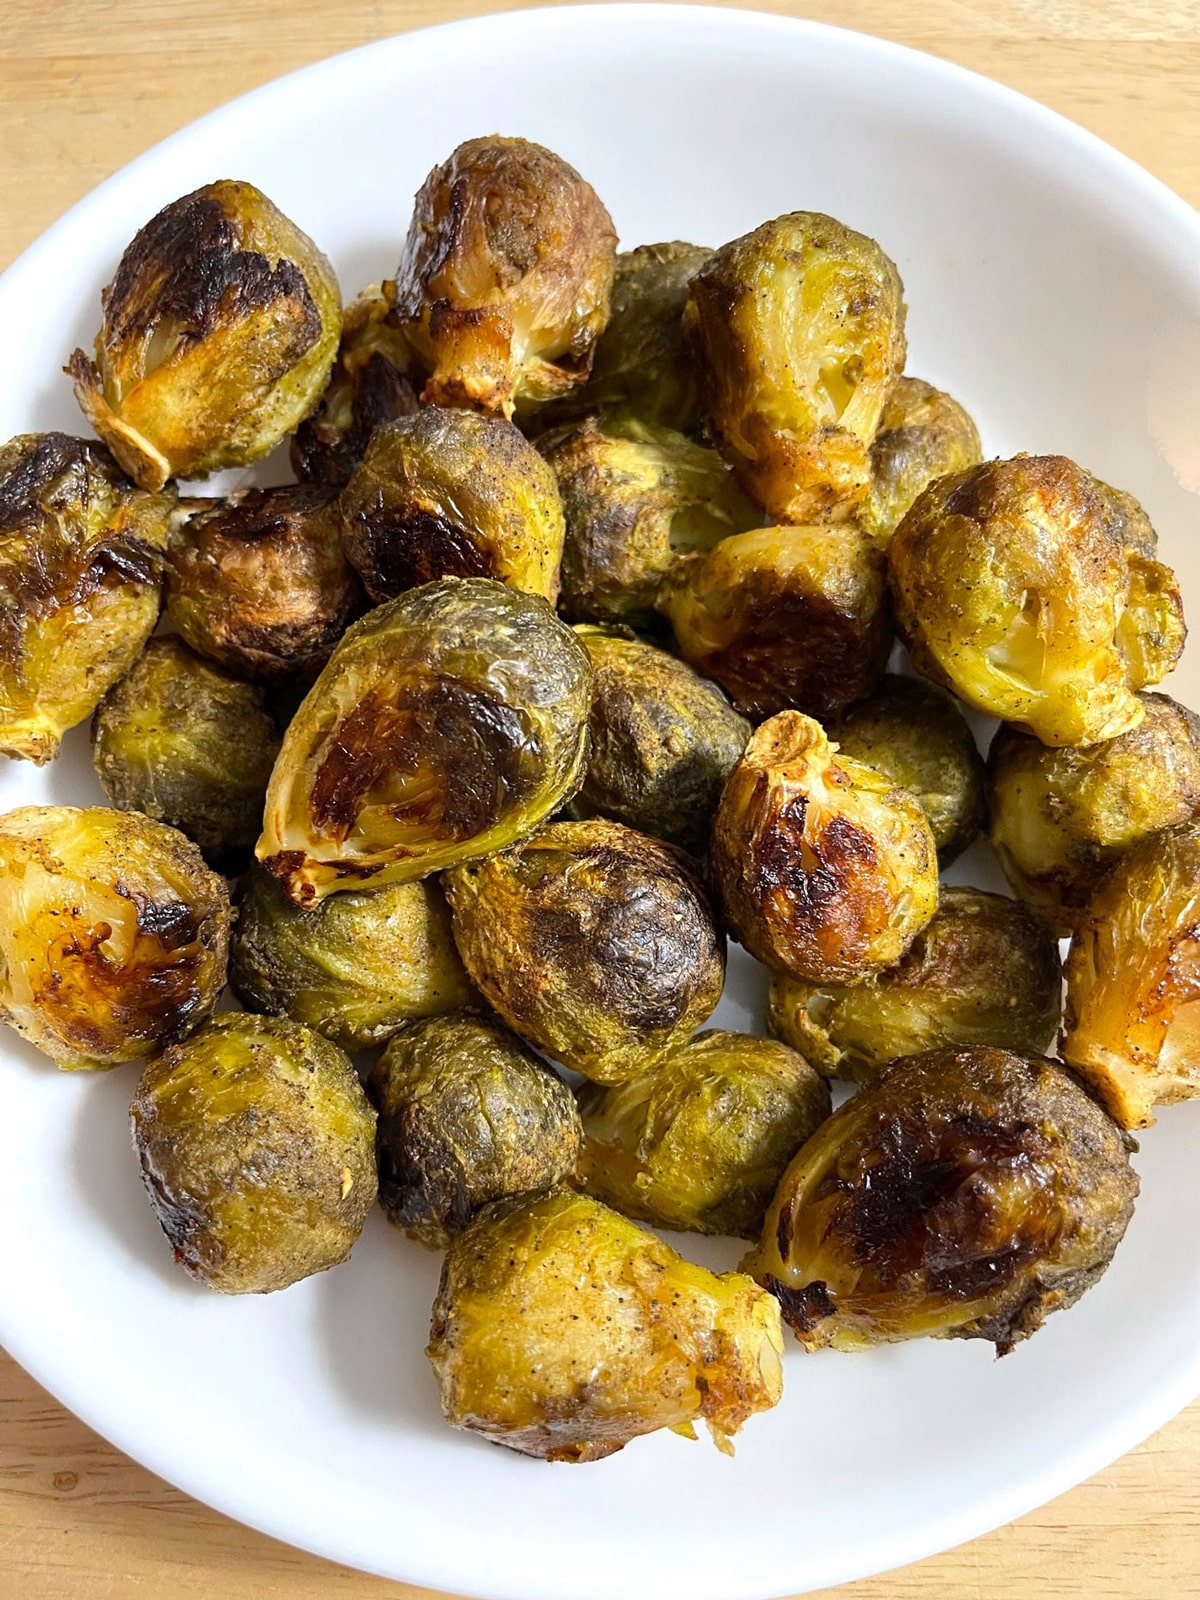 Balsamic roasted frozen brussel sprouts